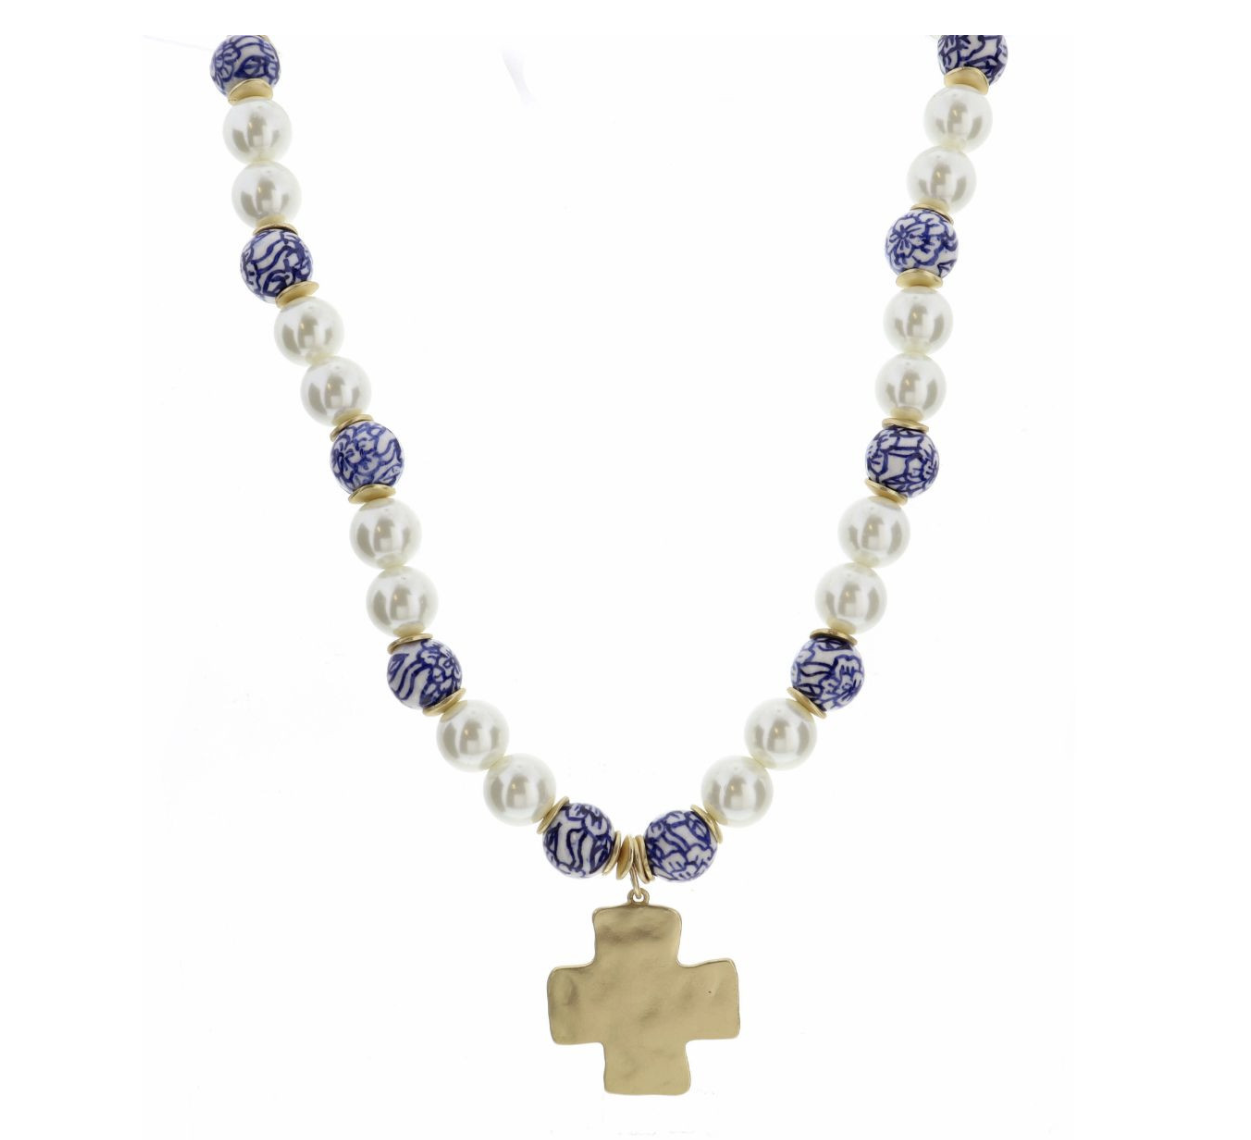 Jewelry - Necklace - Square Cross on Pearl + Blue Porcelain Beads - 16